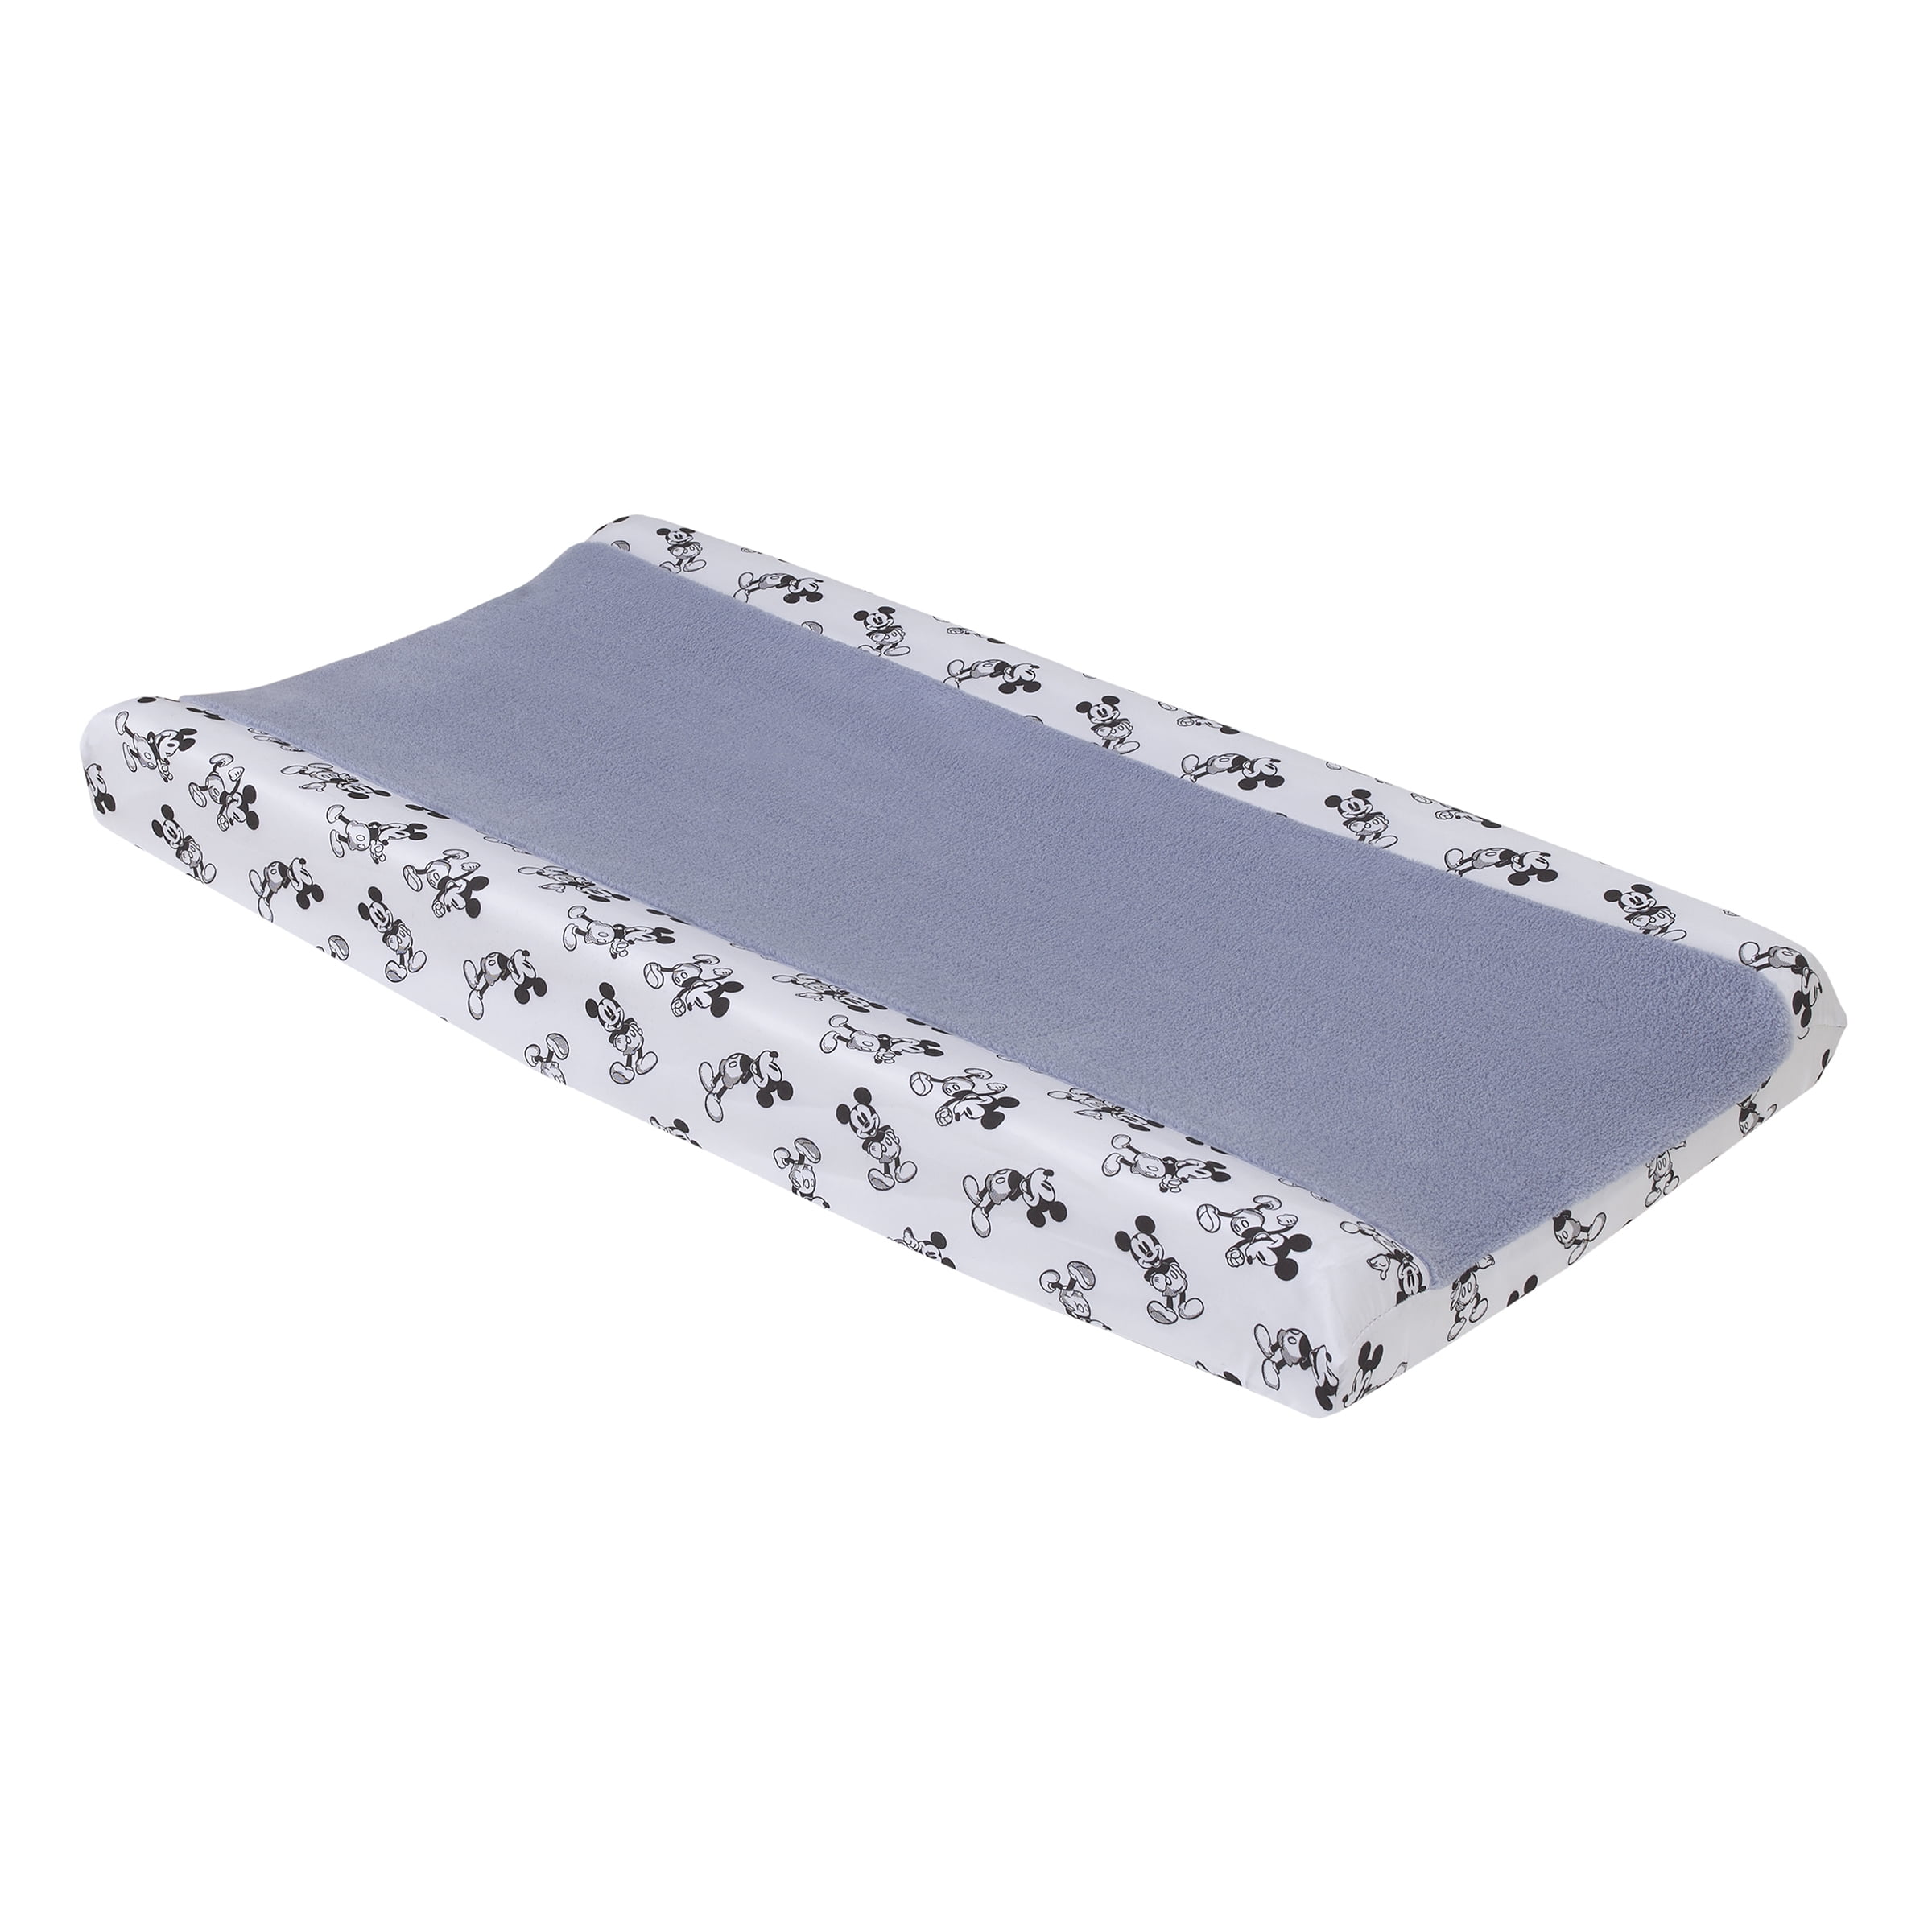 Boritar Changing Pad Covers Dotted Design with Pink Unicorn Print Super Comfy 